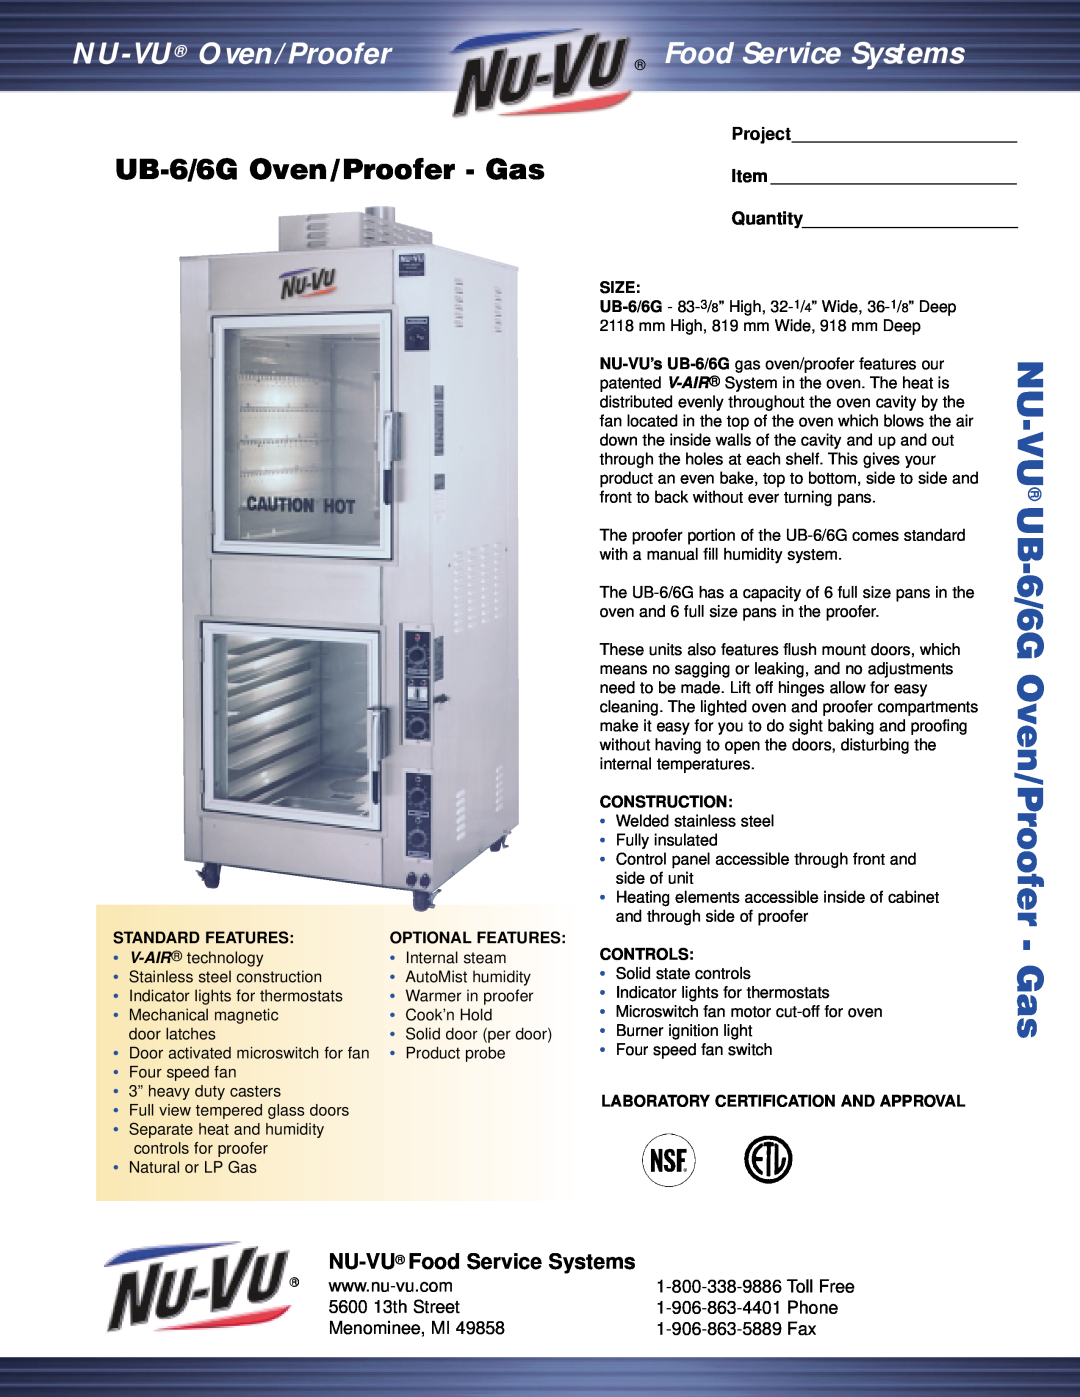 Middleby Cooking Systems Group UB 6/6G manual UB-6/6GOven/Proofer - Gas, NU-VU Food Service Systems, 5600 13th Street 